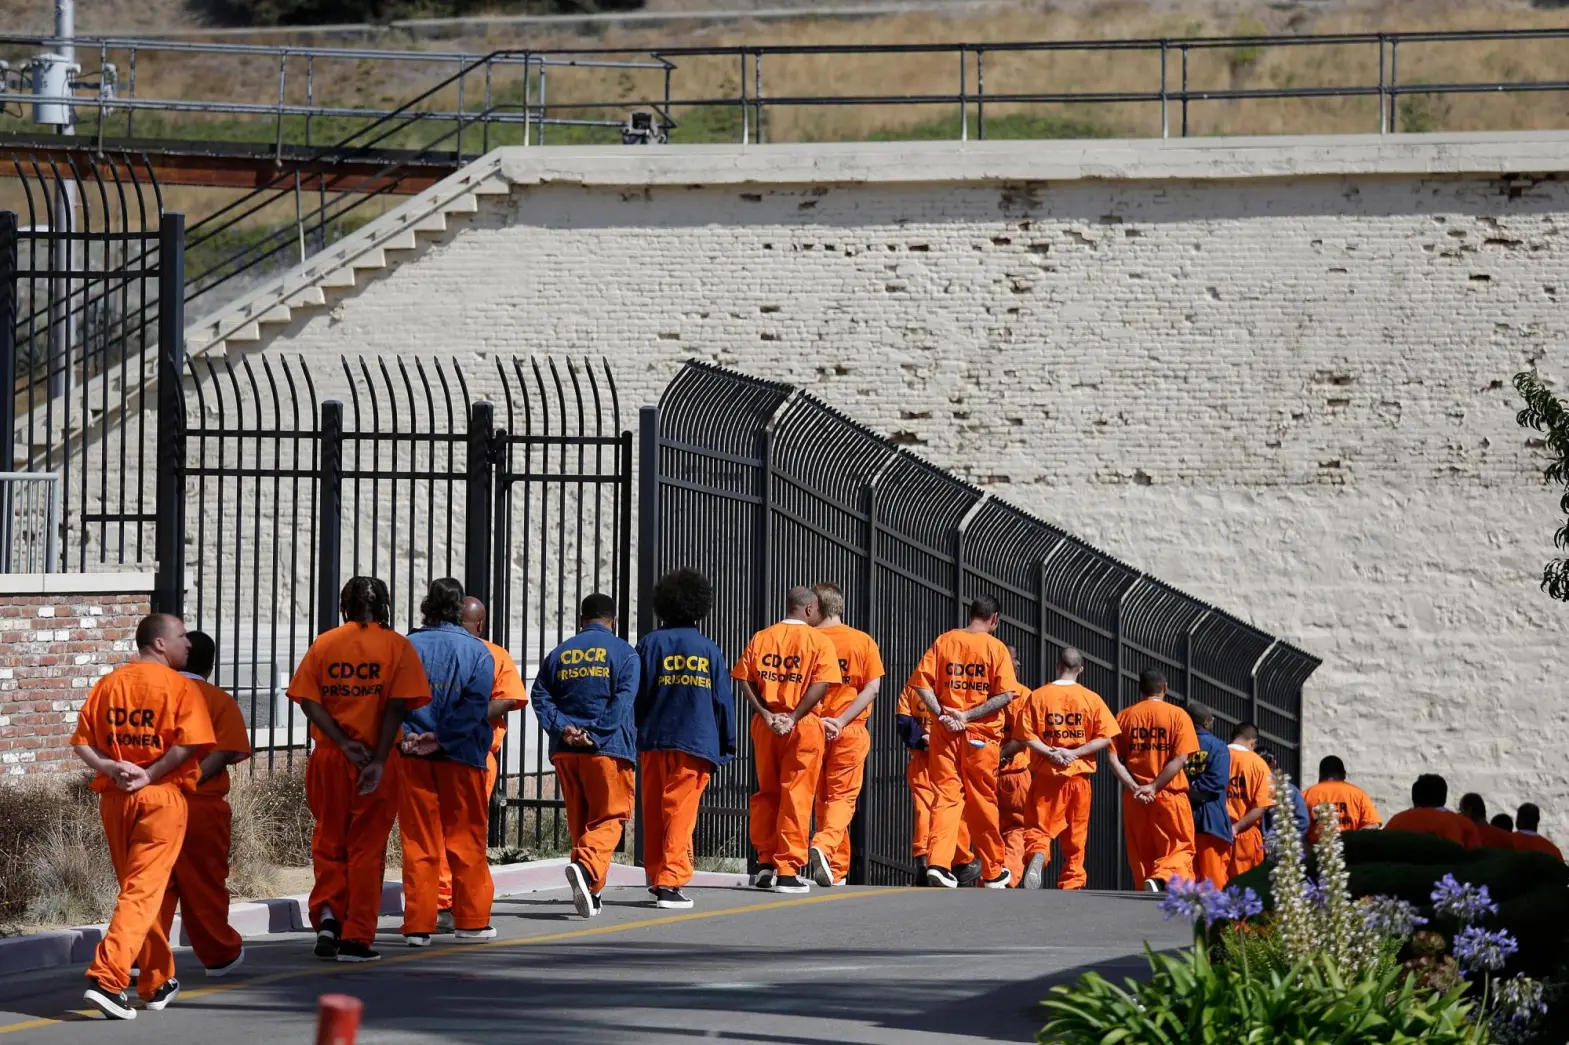 In this Aug. 16, 2016, file photo, general population inmates walk in a line at San Quentin State Prison in San Quentin, Calif. (AP Photo/Eric Risberg, File)